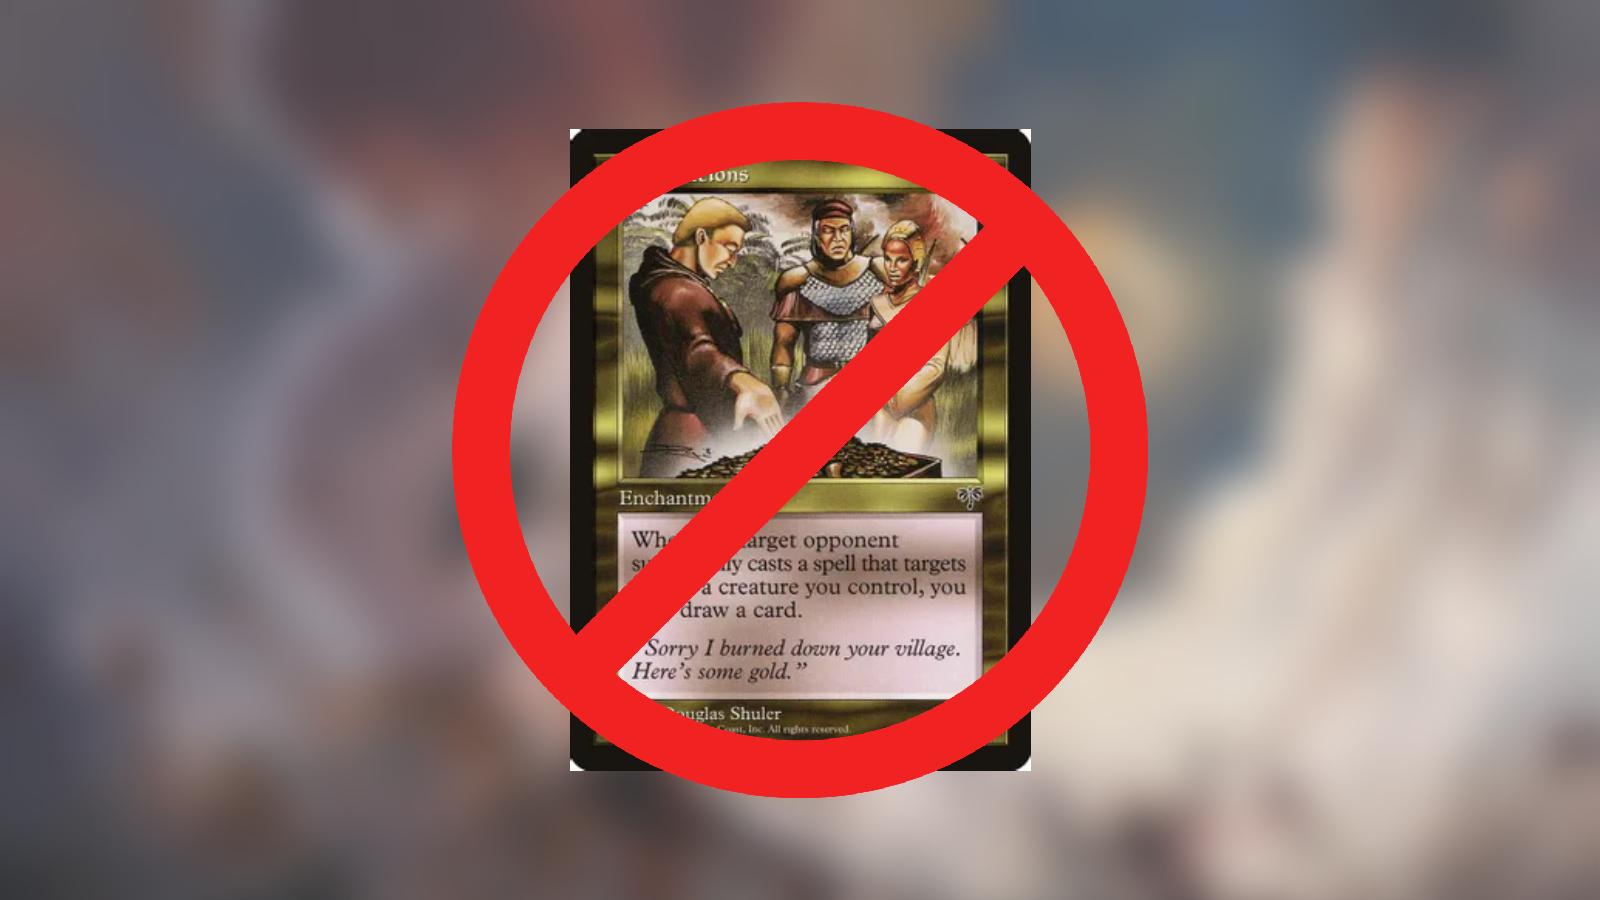 MTG Reparations card over banned sign